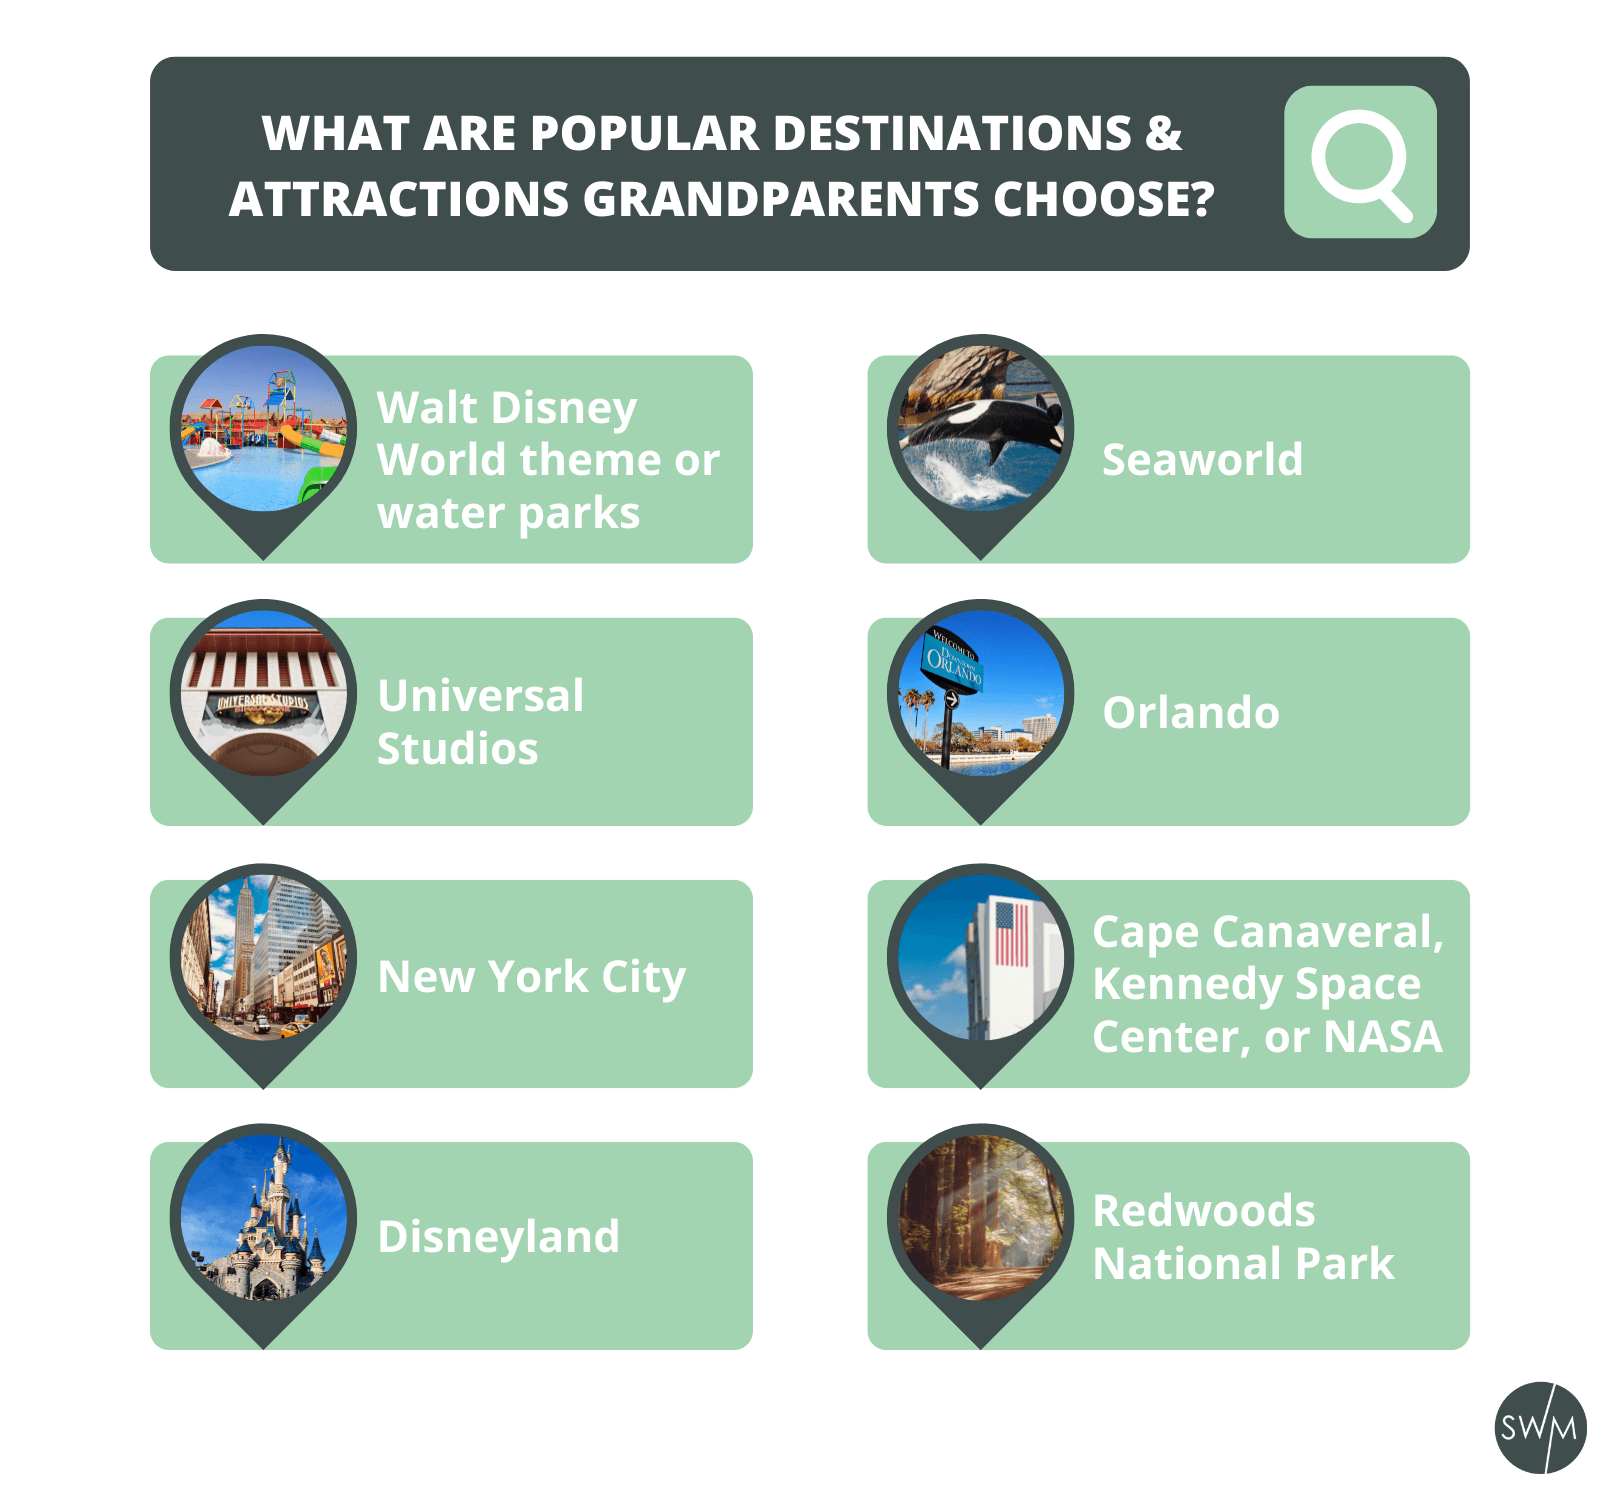 WHAT ARE Popular Destinations & Attractions Grandparents Choose? Walt Disney World theme or water parks Universal Studios New York City Disneyland Sea World Orlando Cape Canaveral, Kennedy Space Center, or NASA Redwoods National Park, and the surrounding area